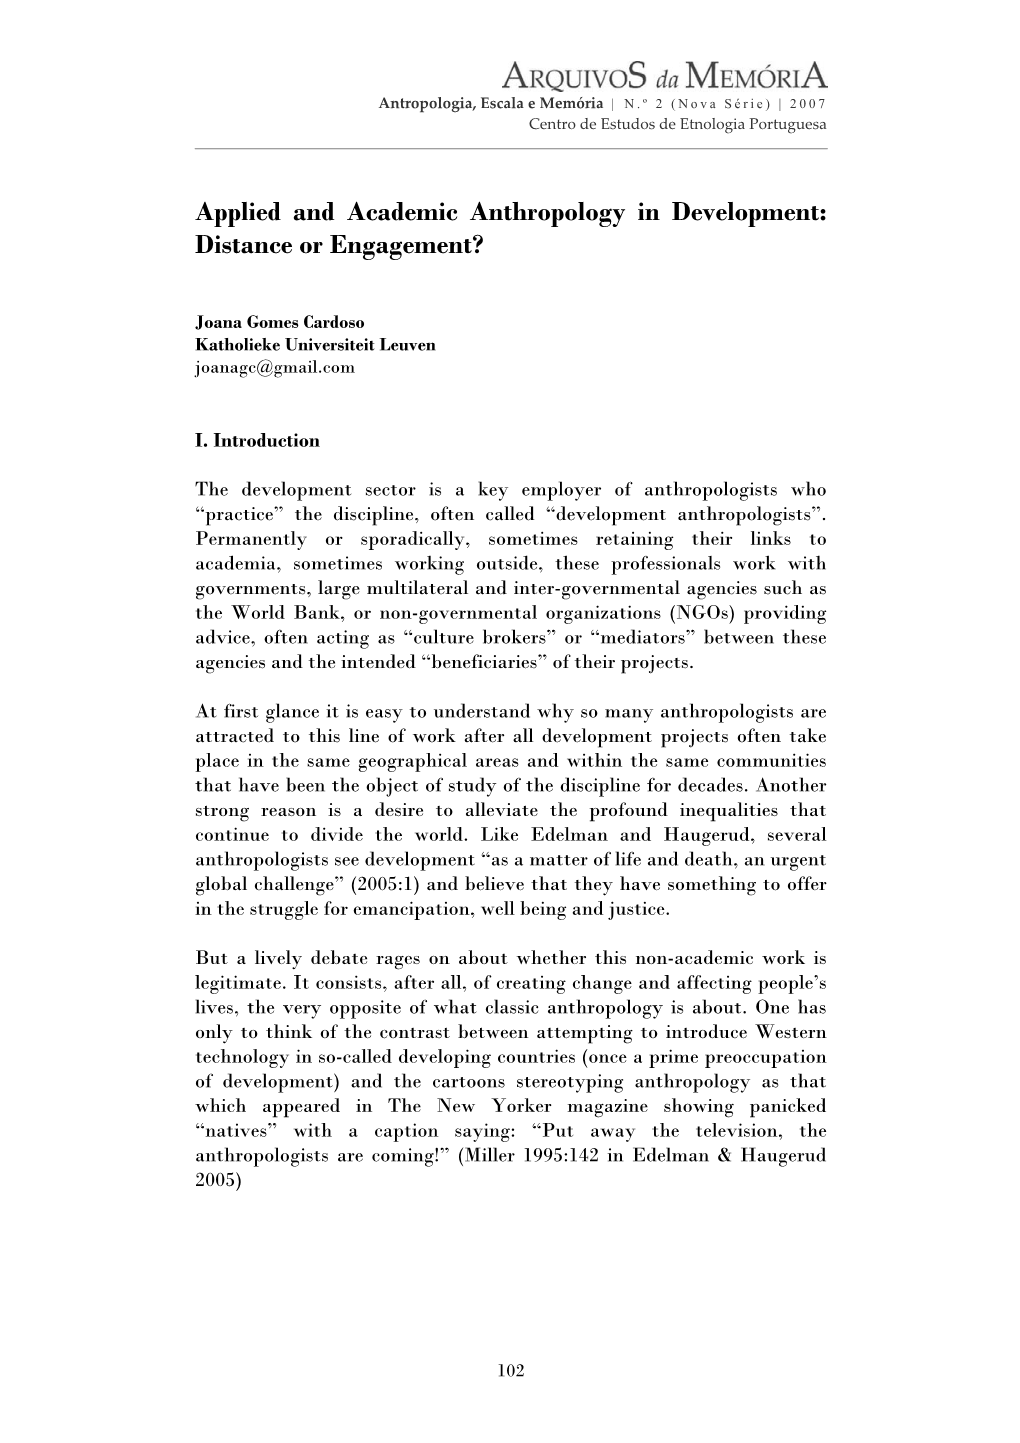 Applied and Academic Anthropology in Development: Distance Or Engagement?